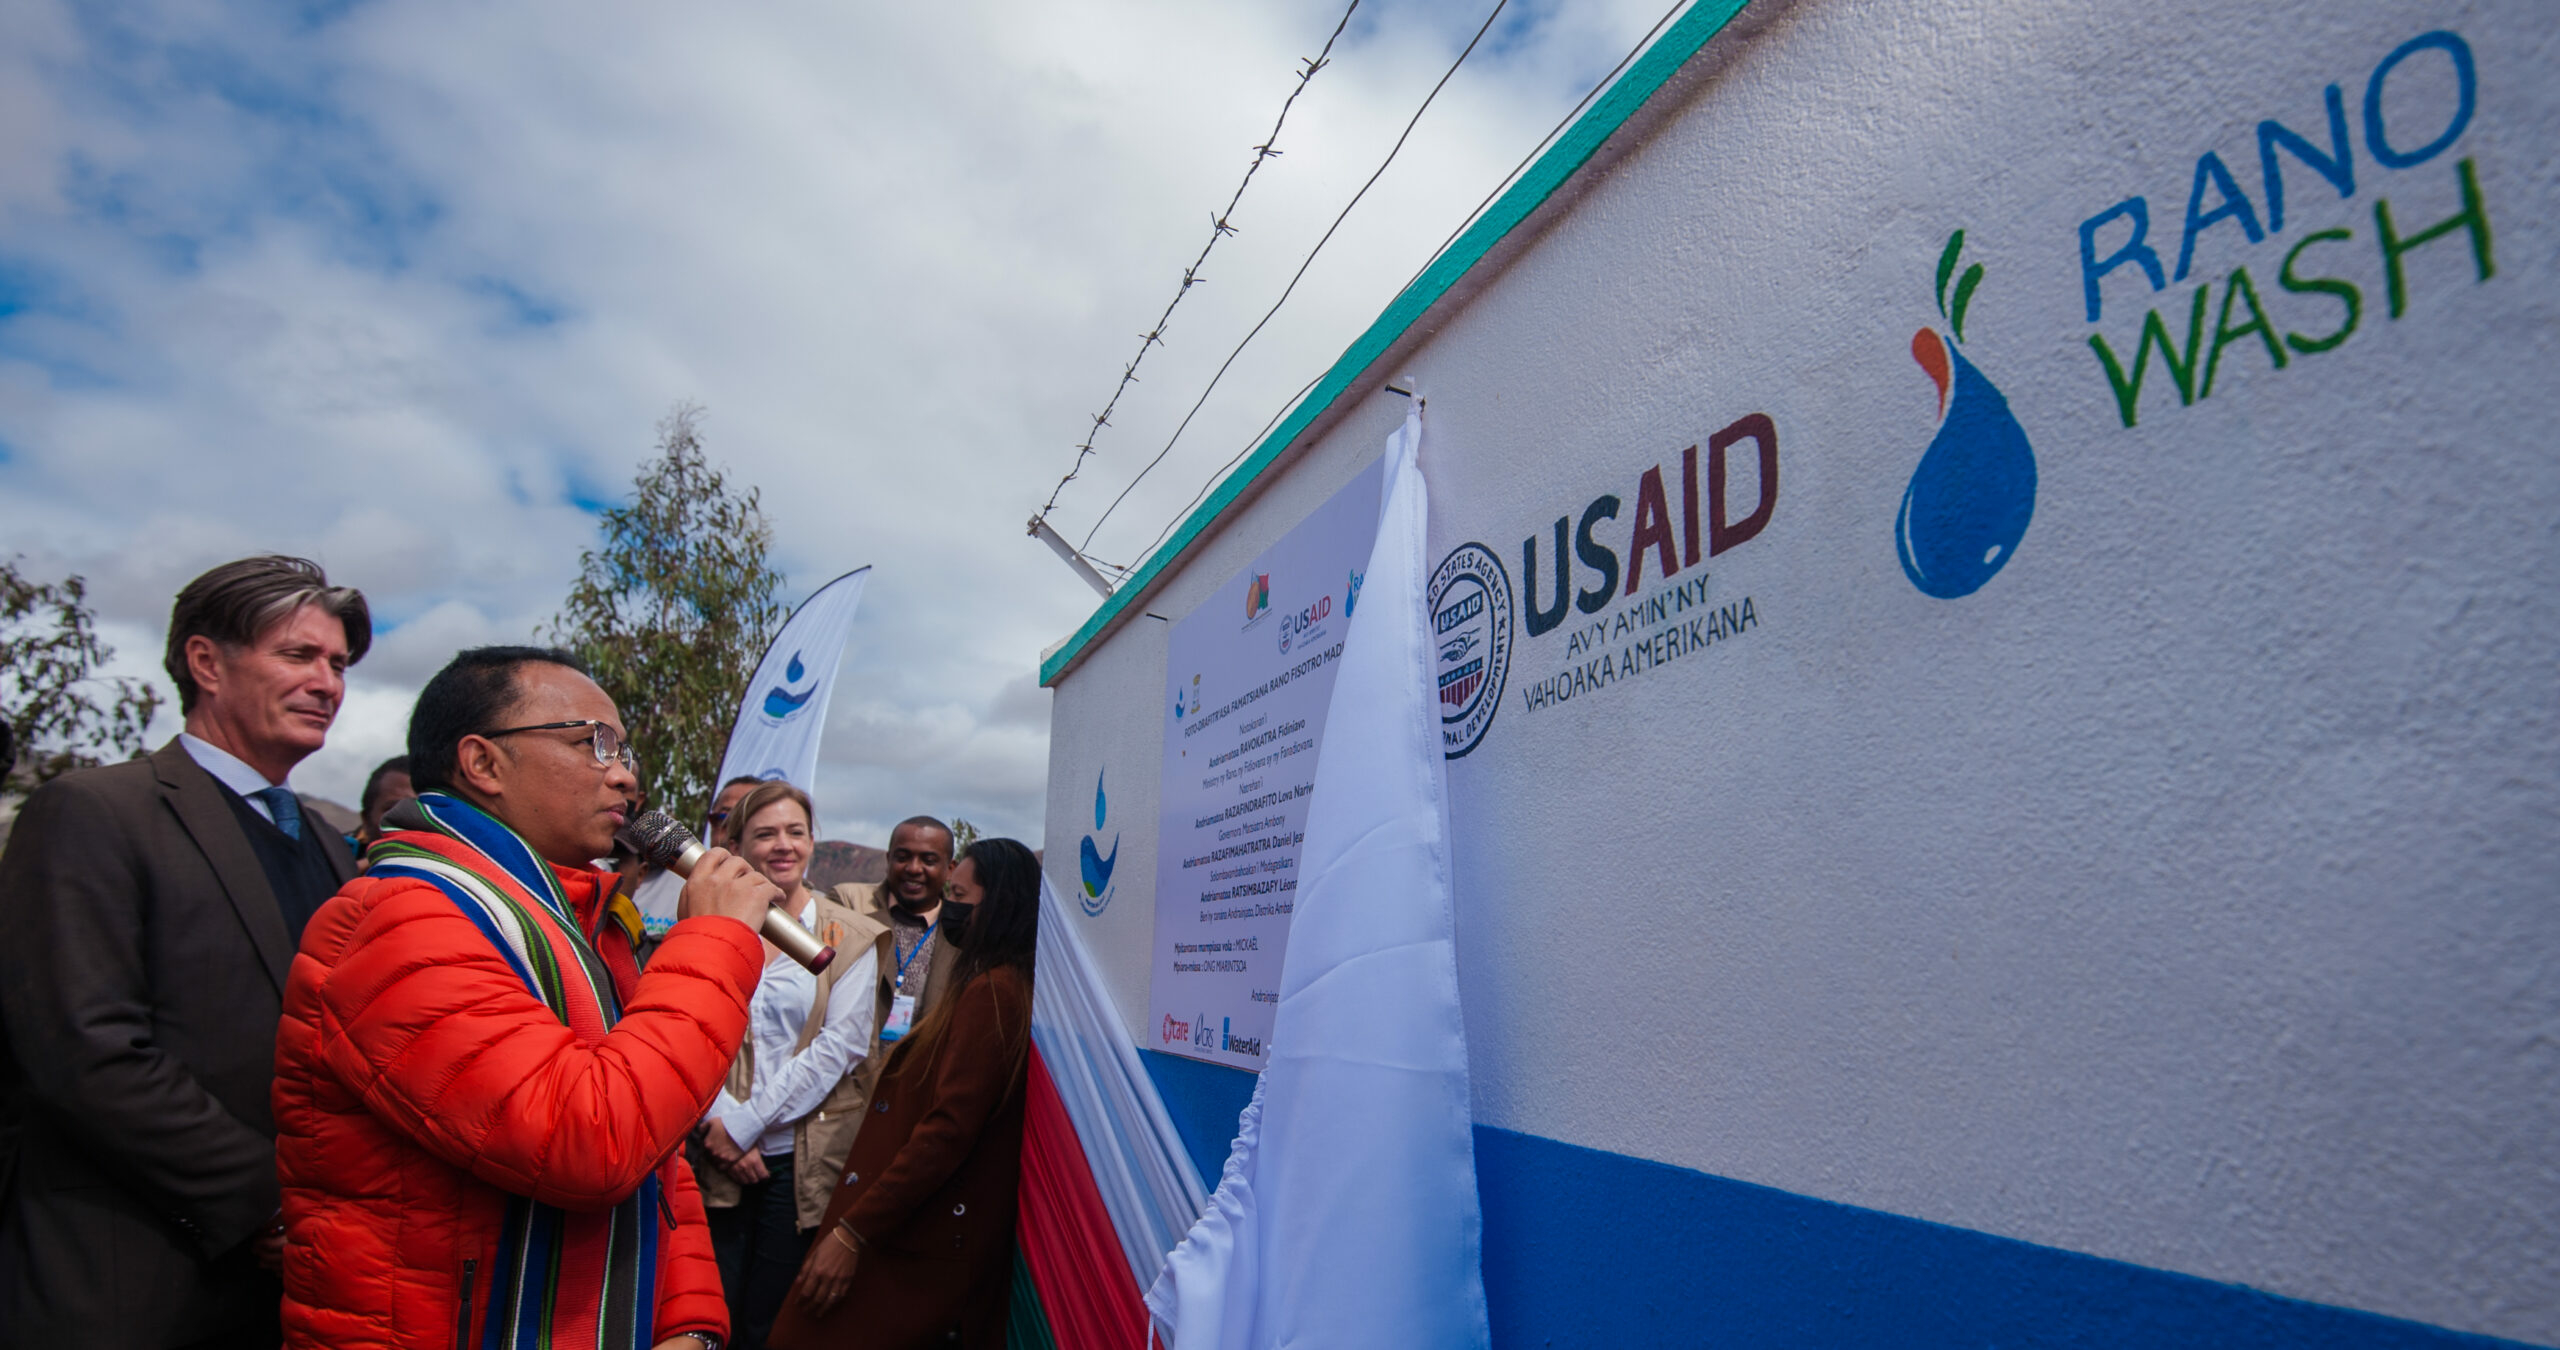 The United States helps improve access to safe water and sanitation